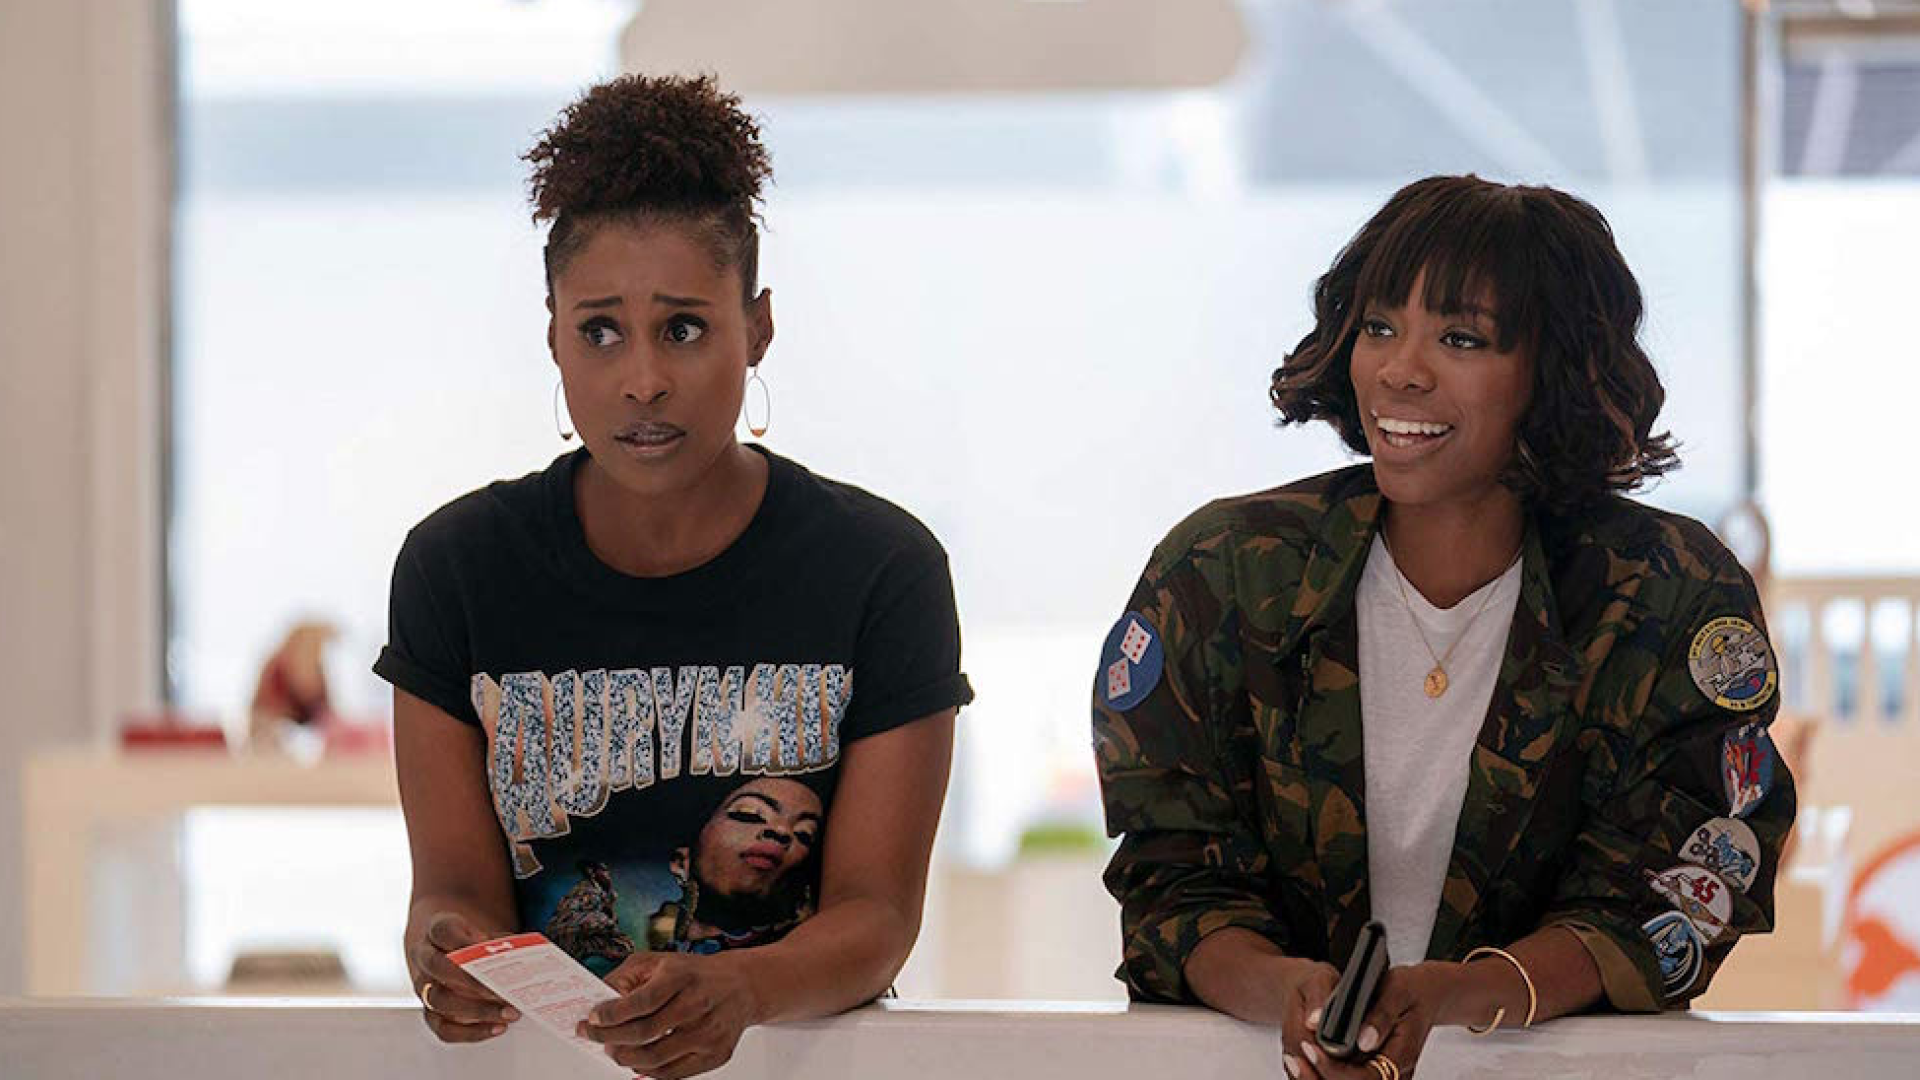 Everything You Need To Know Before You Watch The Season Three Premiere Of 'Insecure'